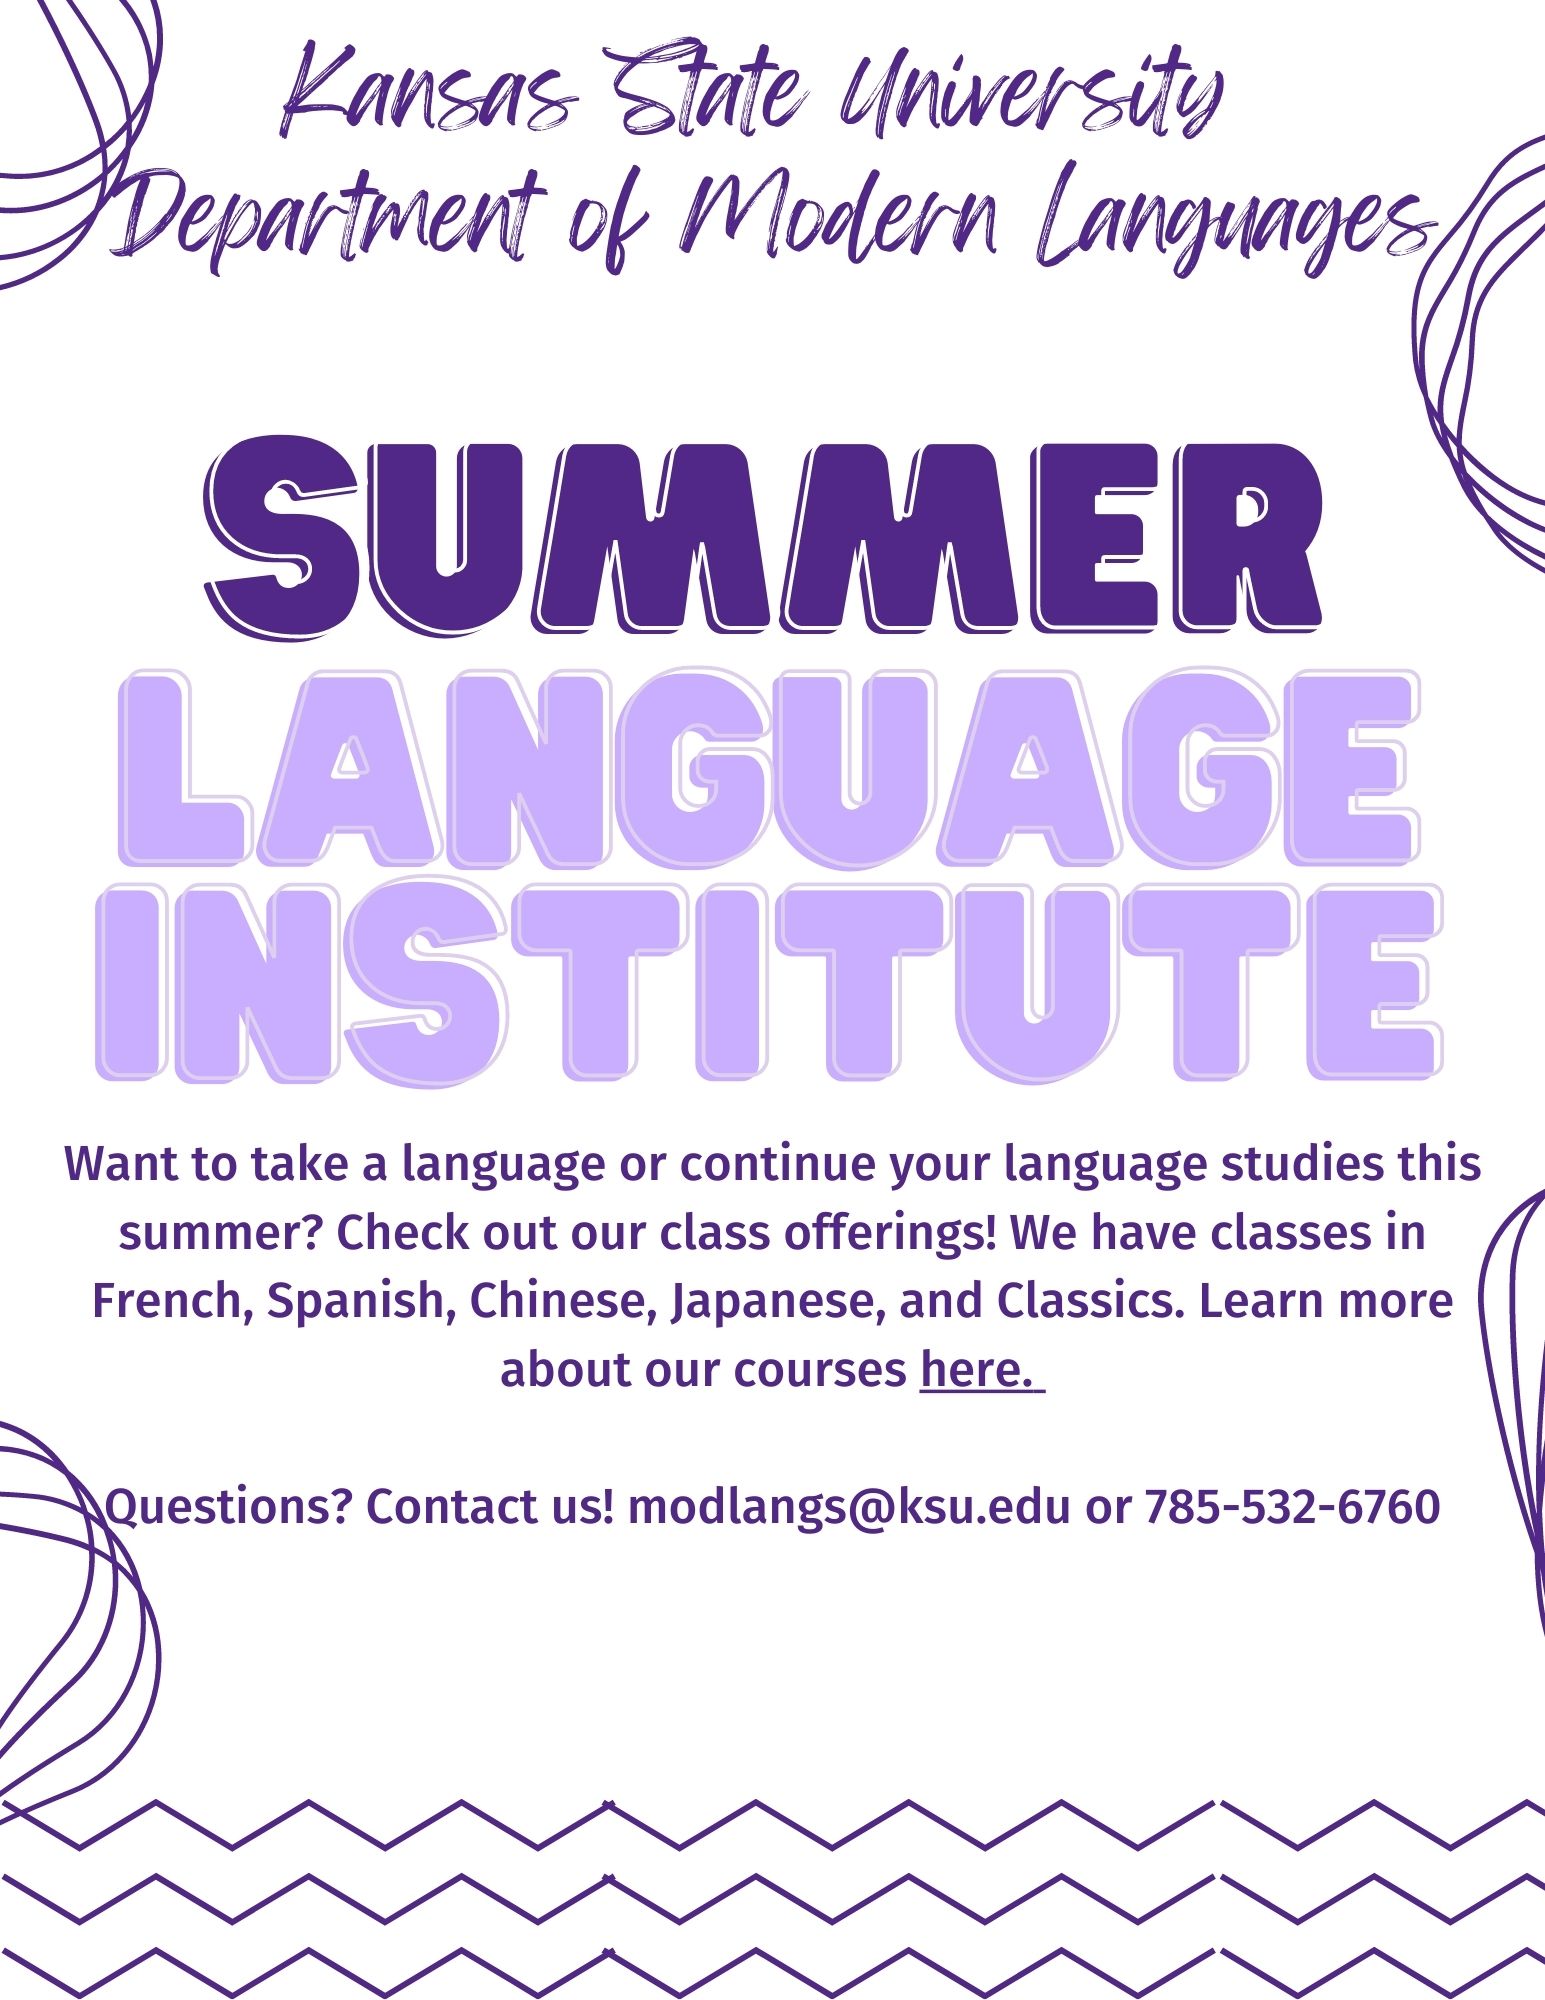 Kansas State University  Department of Modern Languages. Language institute Summer. Want to take a language or continue your language studies this summer? Check out our class offerings! We have classes in French, Spanish, Chinese, Japanese, and Classics. Learn more about our courses here.   Questions? Contact us! modlangs@ksu.edu or 785-532-6760